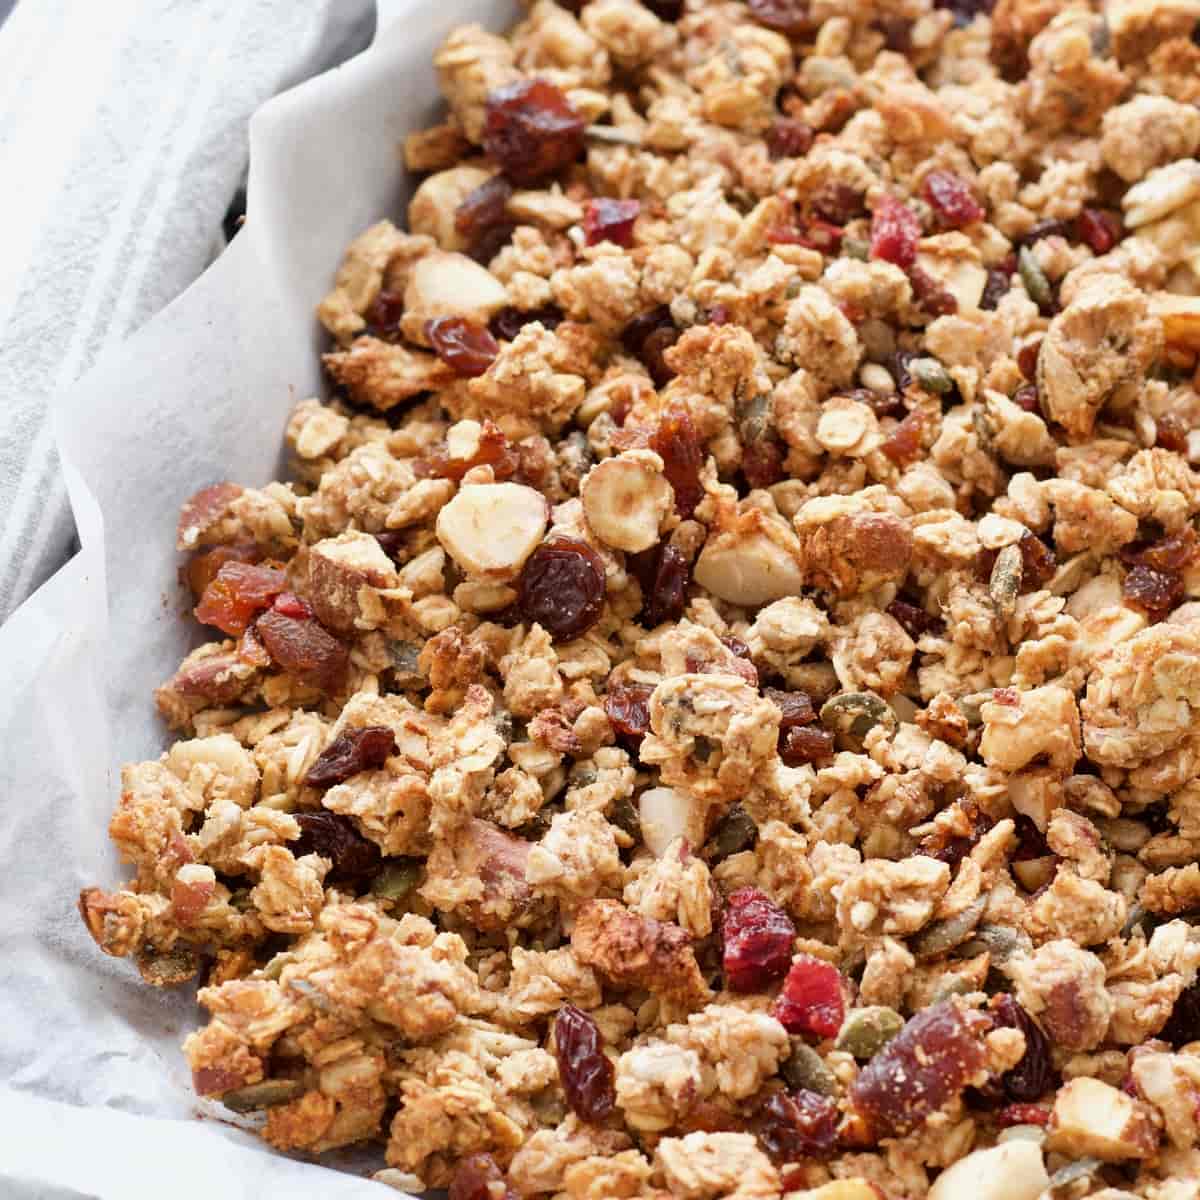 Baked homemade granola in a tray.